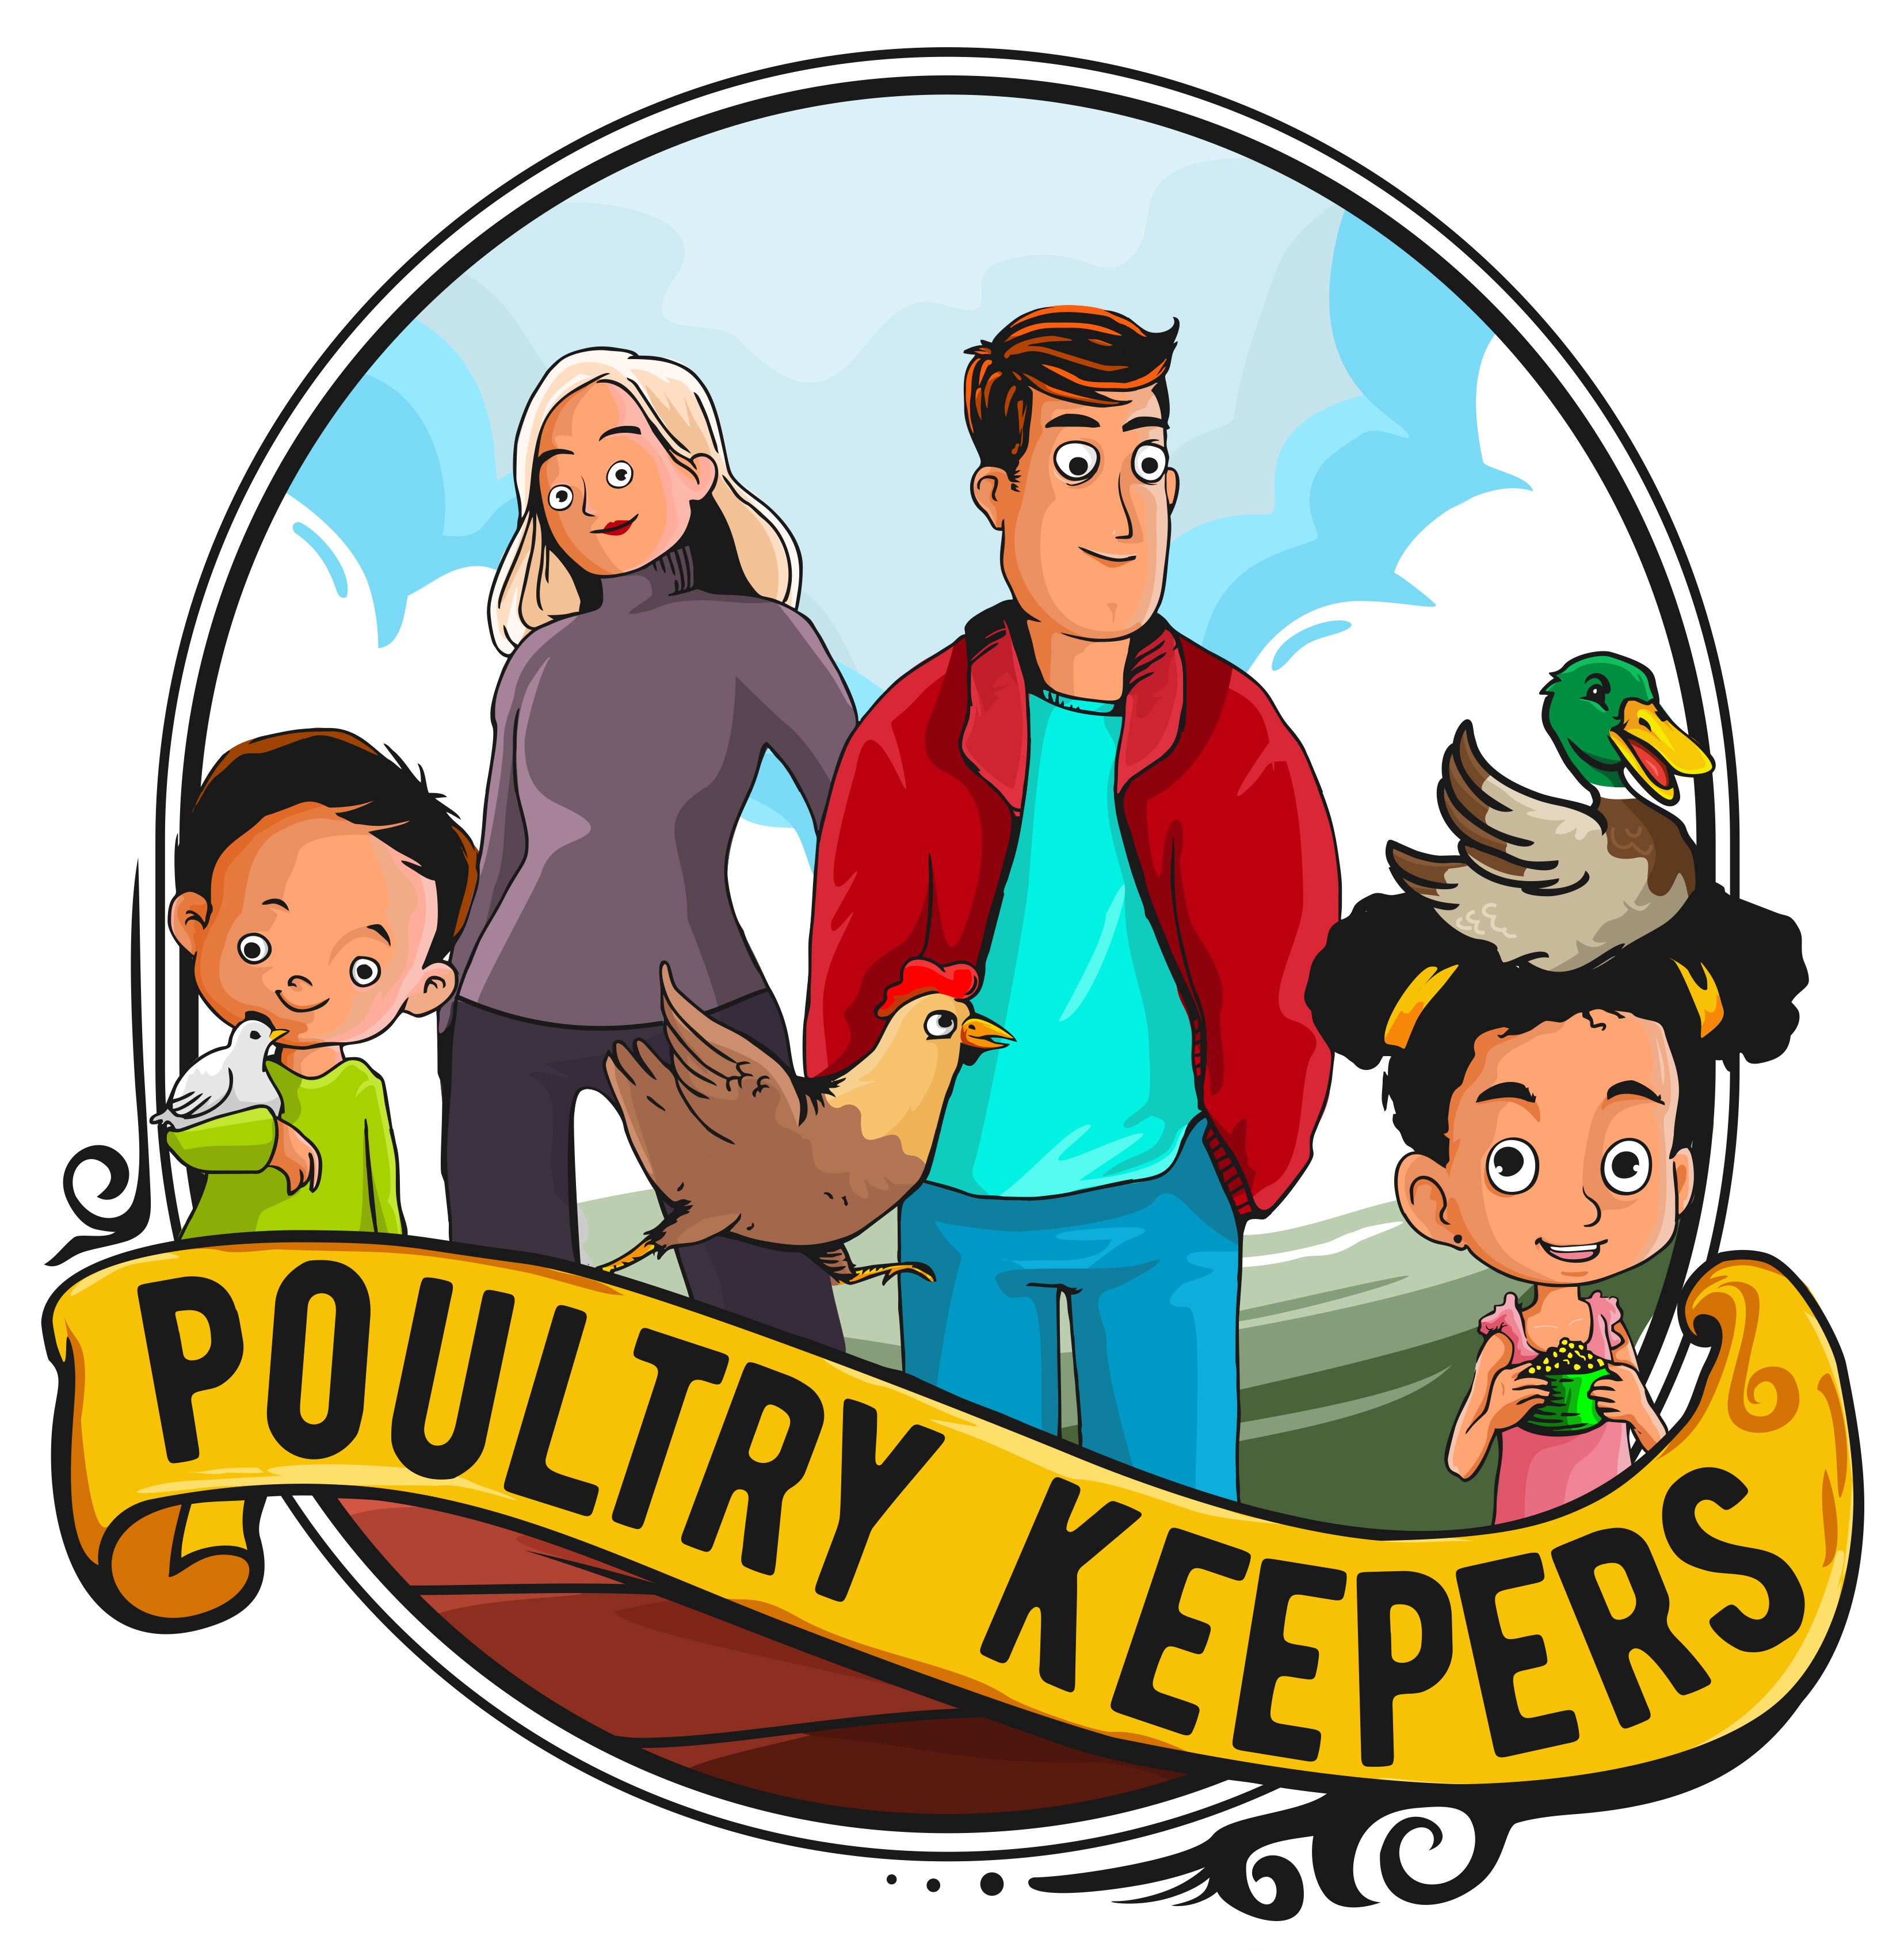 PoultryKeepers